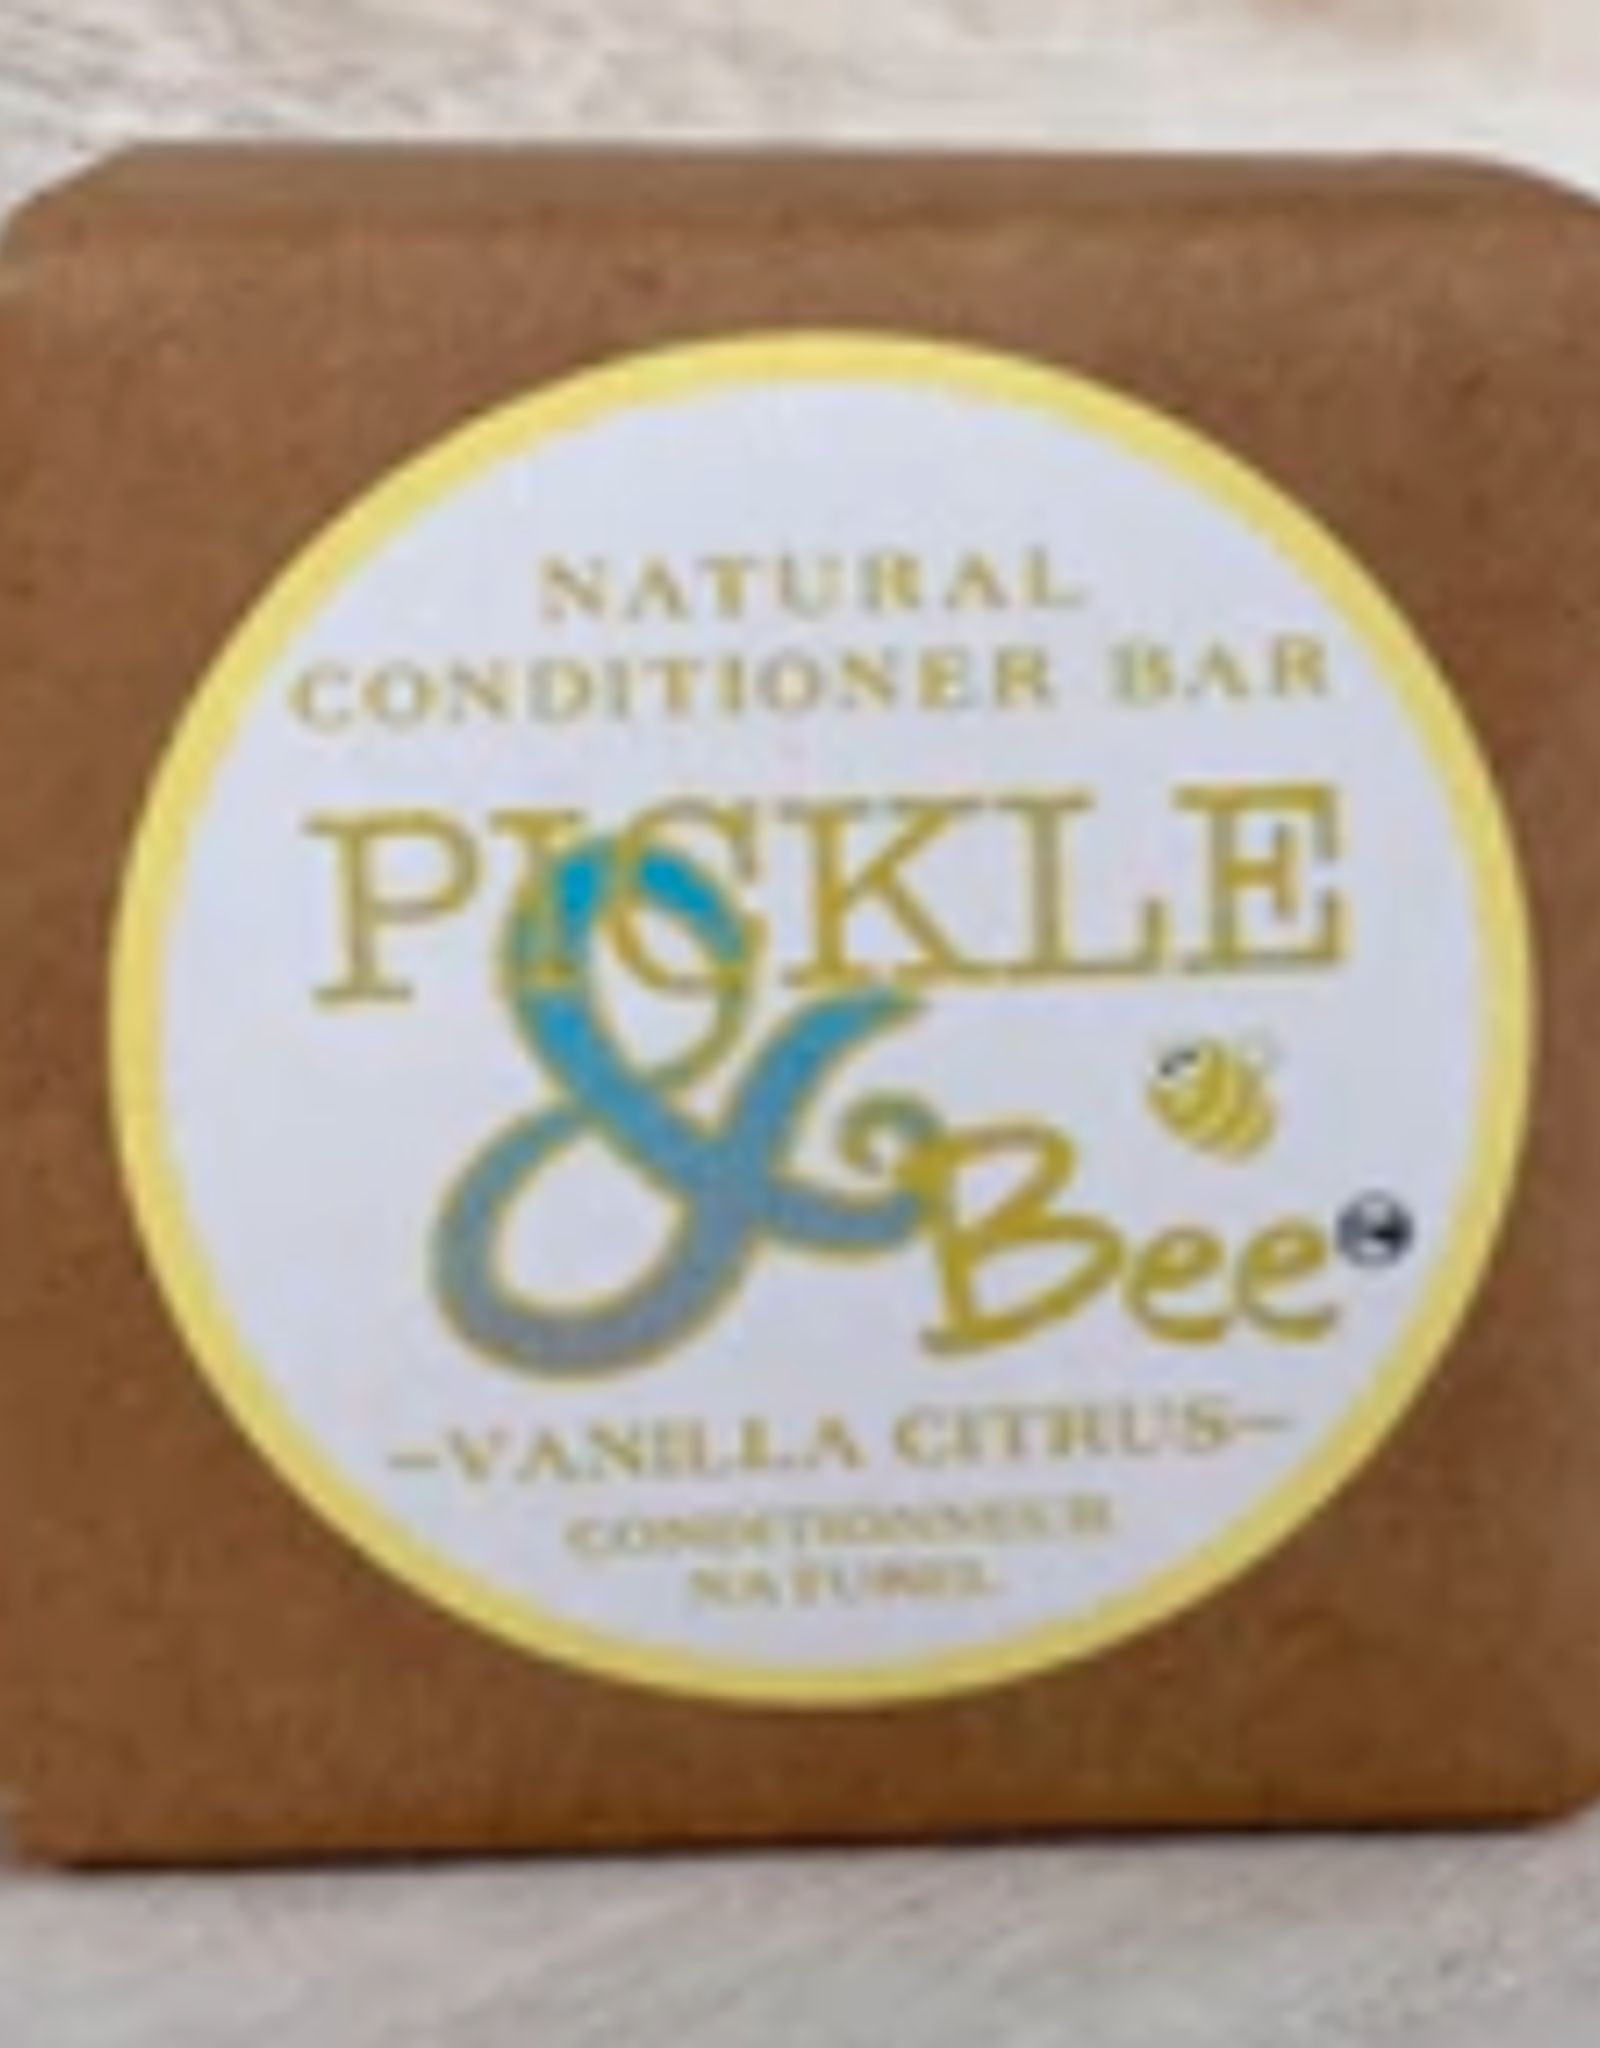 Pickle & Bee Pickle & Bee Conditioner Bar